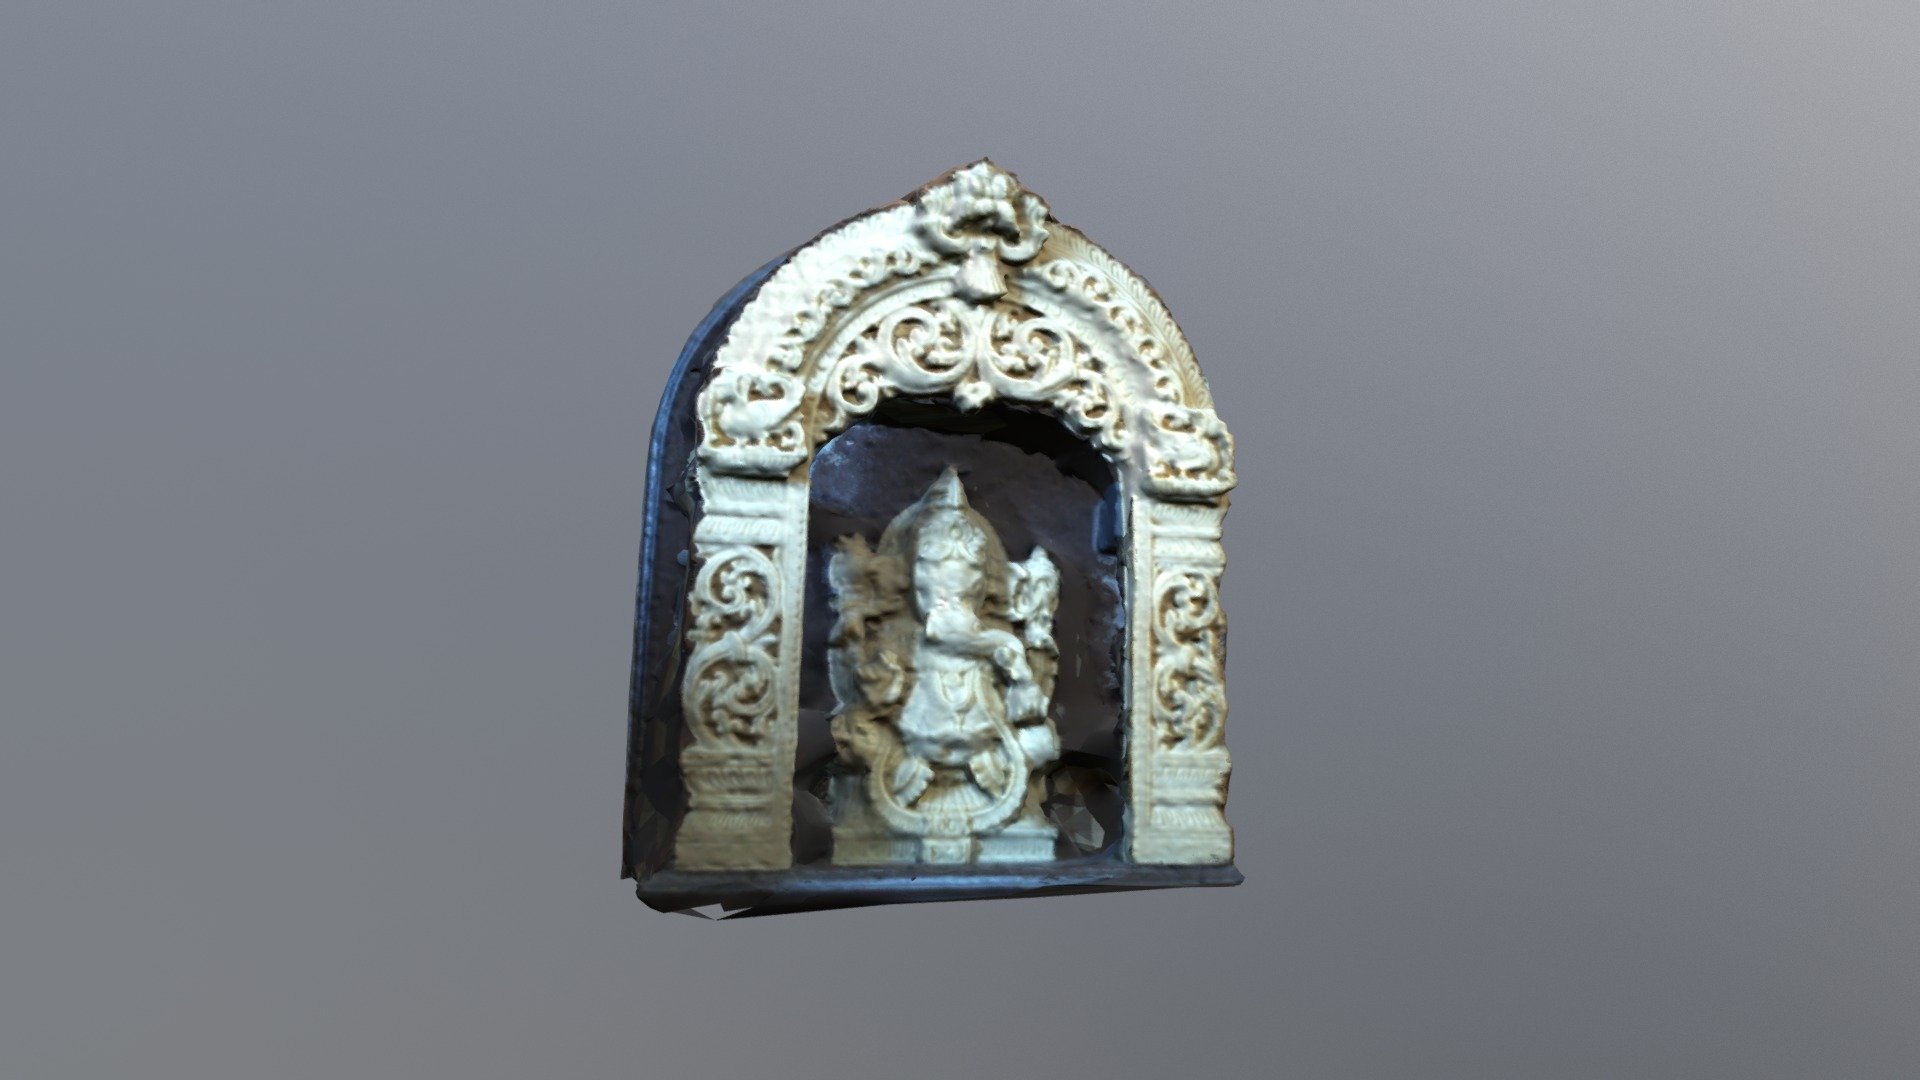 Ganapathi Idol 3D Scanning with webcam 2D images